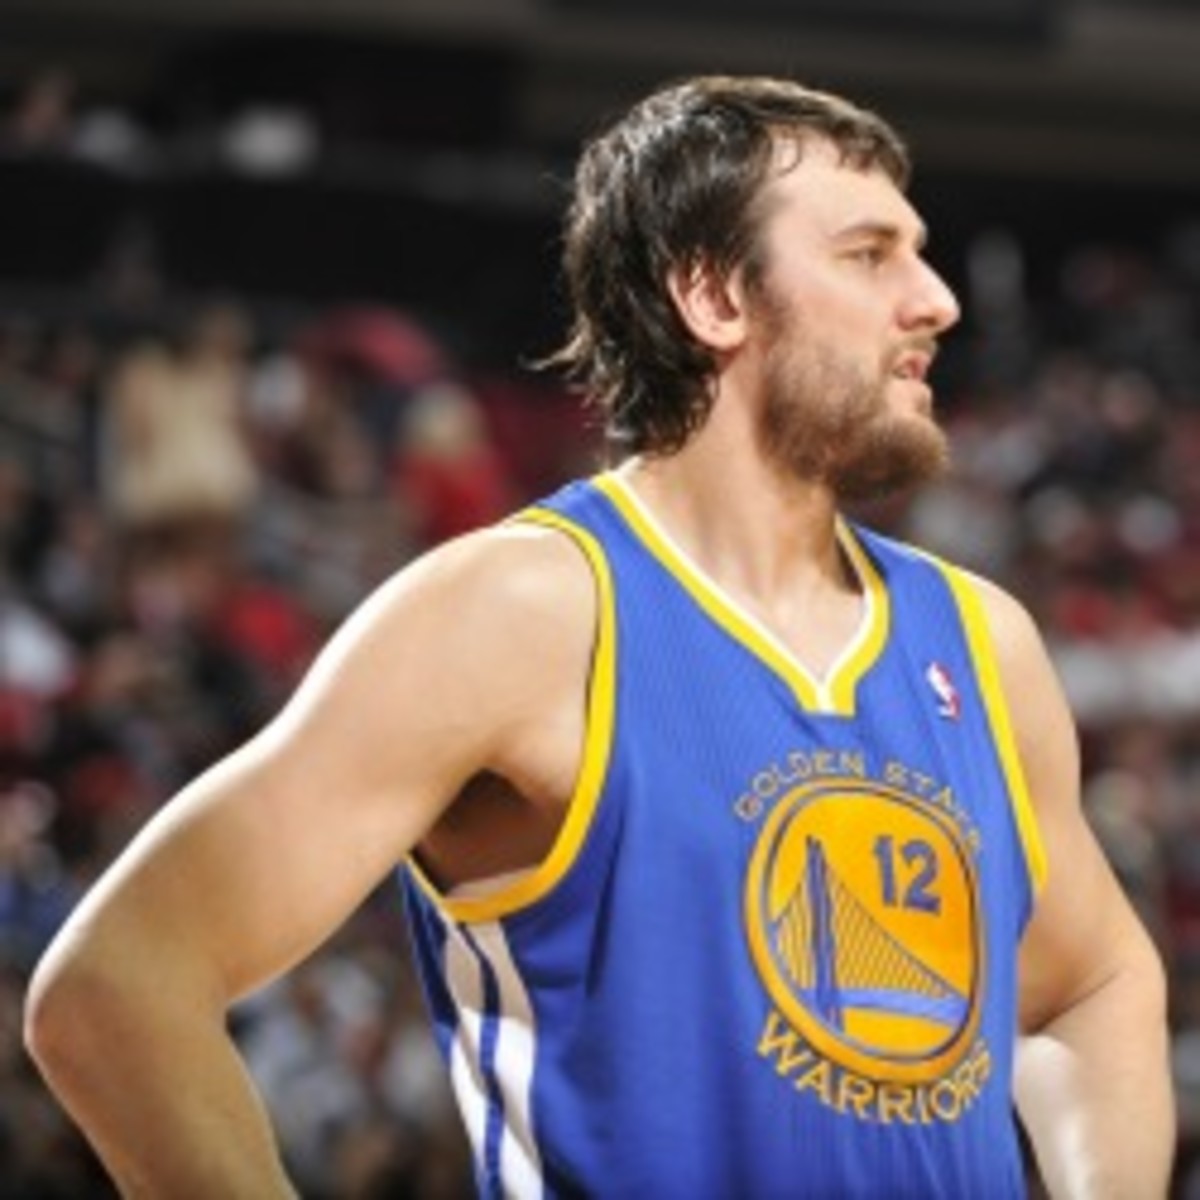 Warriors center Andrew Bogut has played in just 12 of the team's 54 games this season while recovering from ankle surgery. (Bill Baptist/Getty Images)